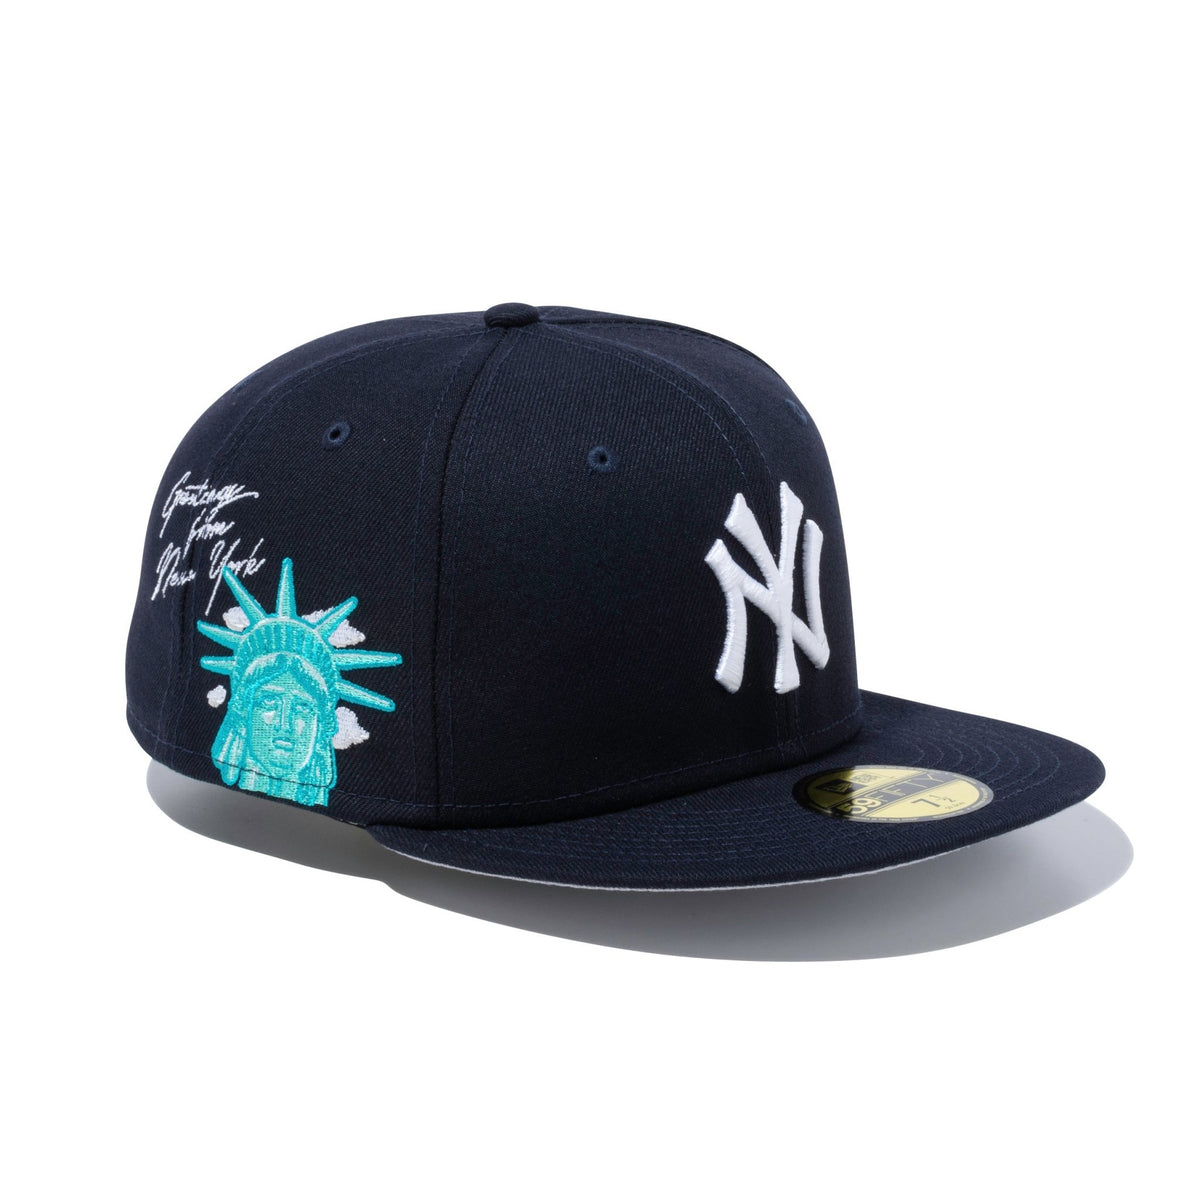 NY New Era Icon 59FIFTY Fitted Hat ヤンキース